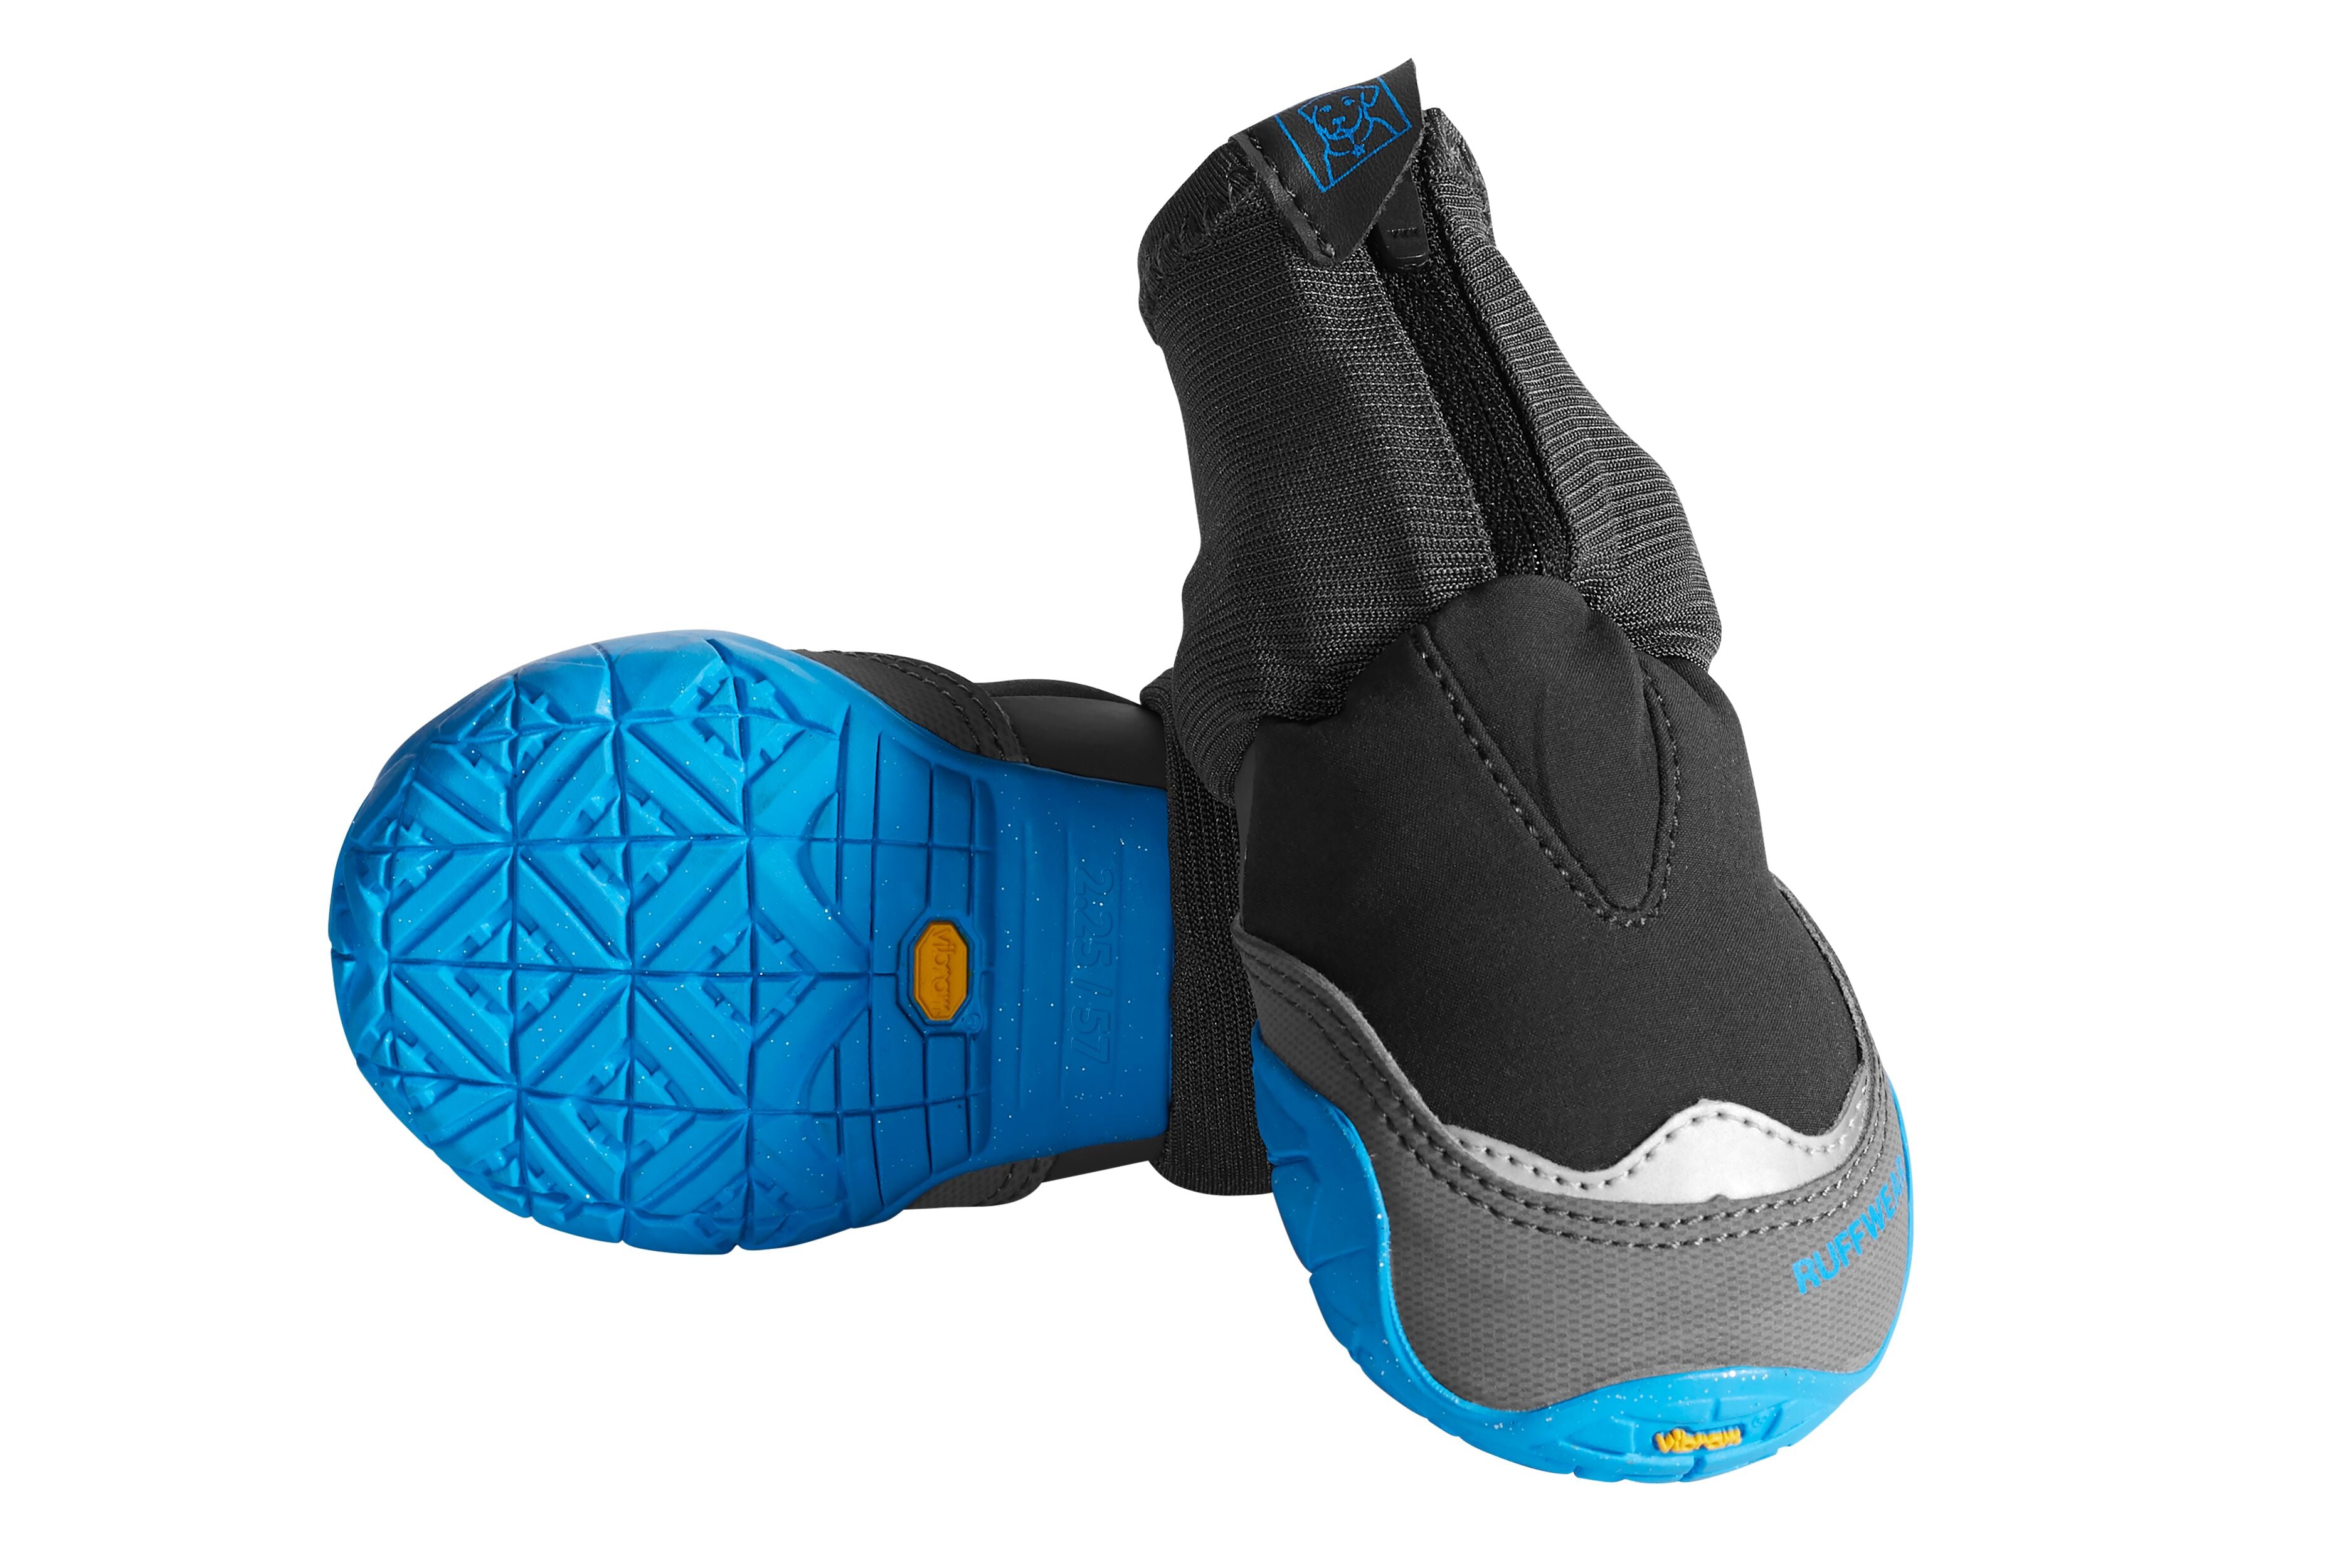 This is an image of Ruffwear's Polar Trex Winter Dog Boots. 